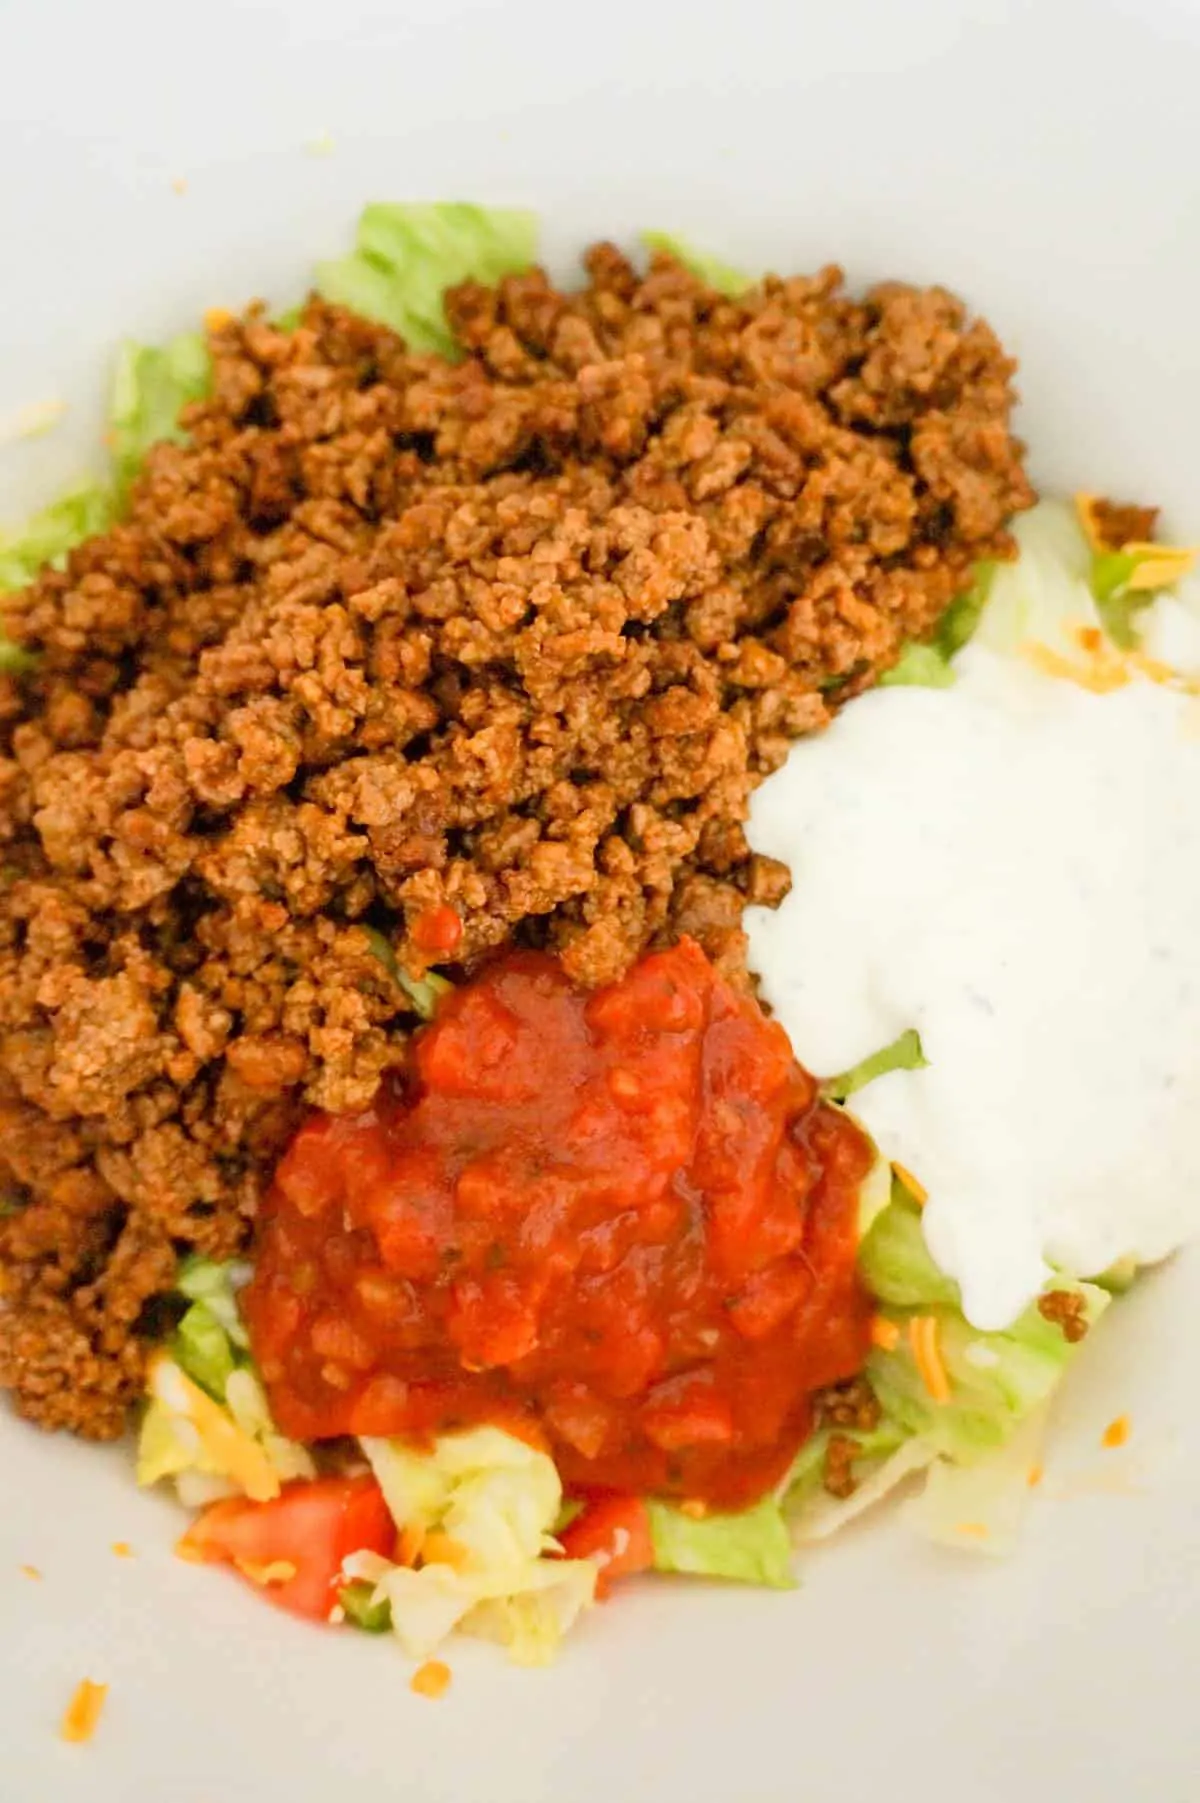 beef taco meat, salsa and ranch dressing on top of salad in a mixing bowl